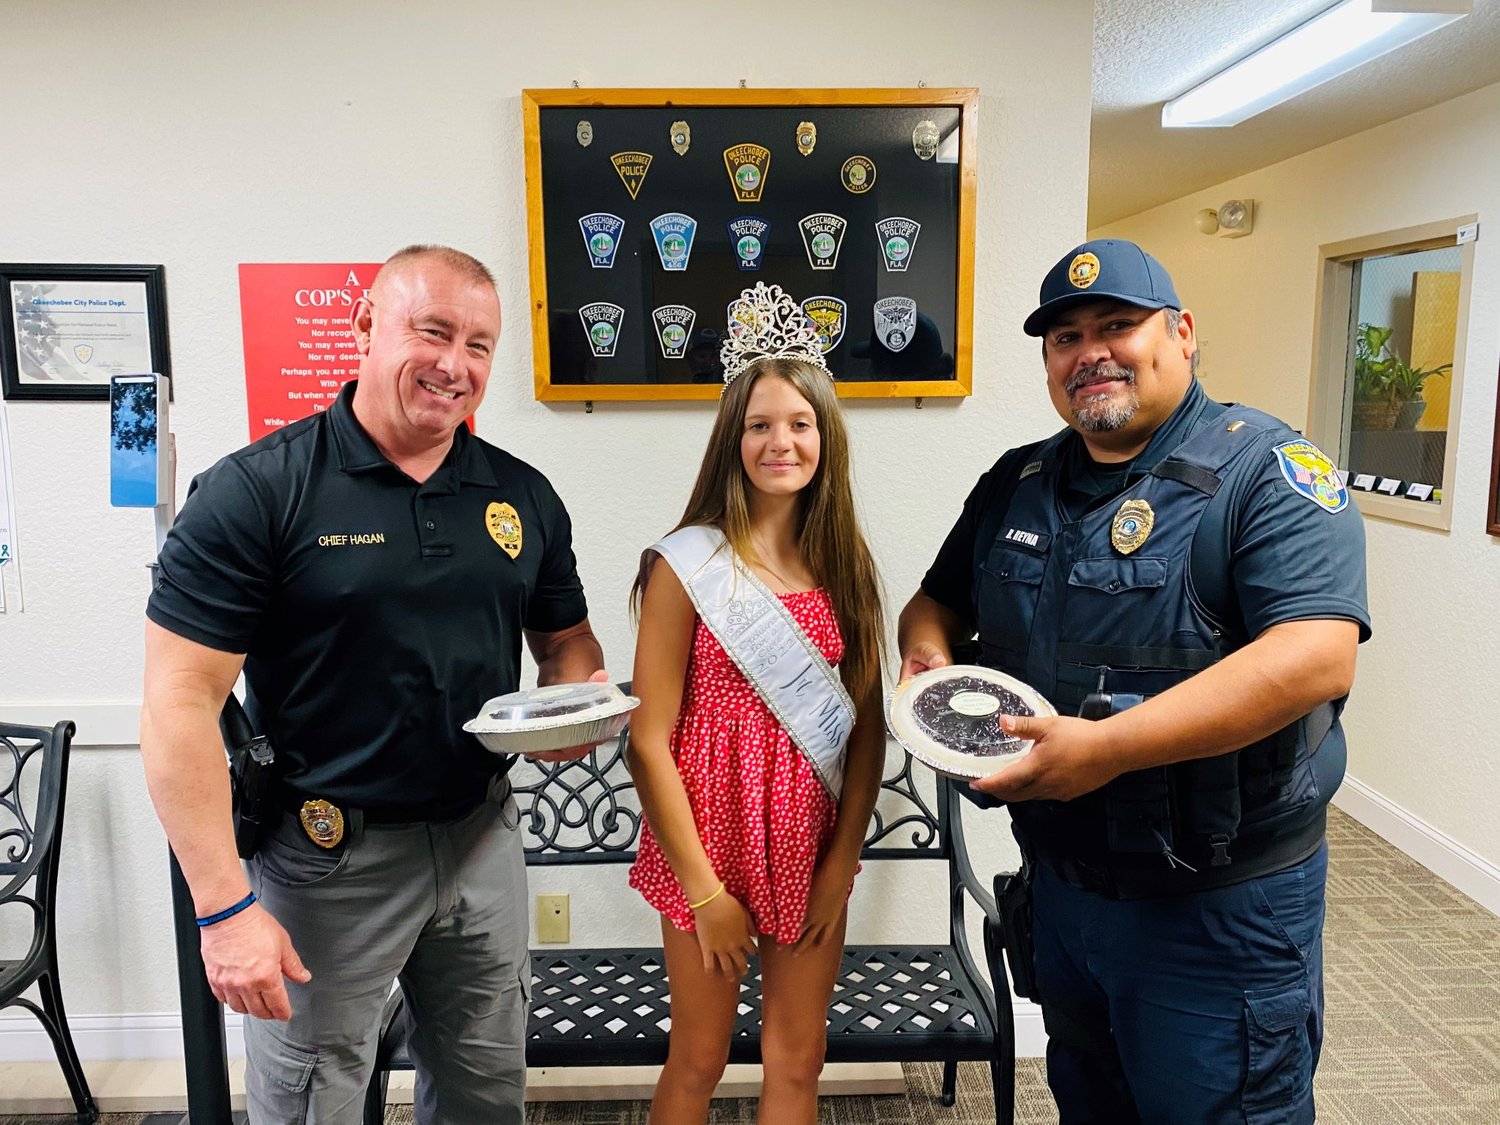 Thank you to Brooke Phillips "Jr. Miss Okeechobee" for treating the Okeechobee Police Officers to blueberry pies! Pictured with Brooke are Police Chief Donald Hagan (left) and Lt. Belen Reyna.